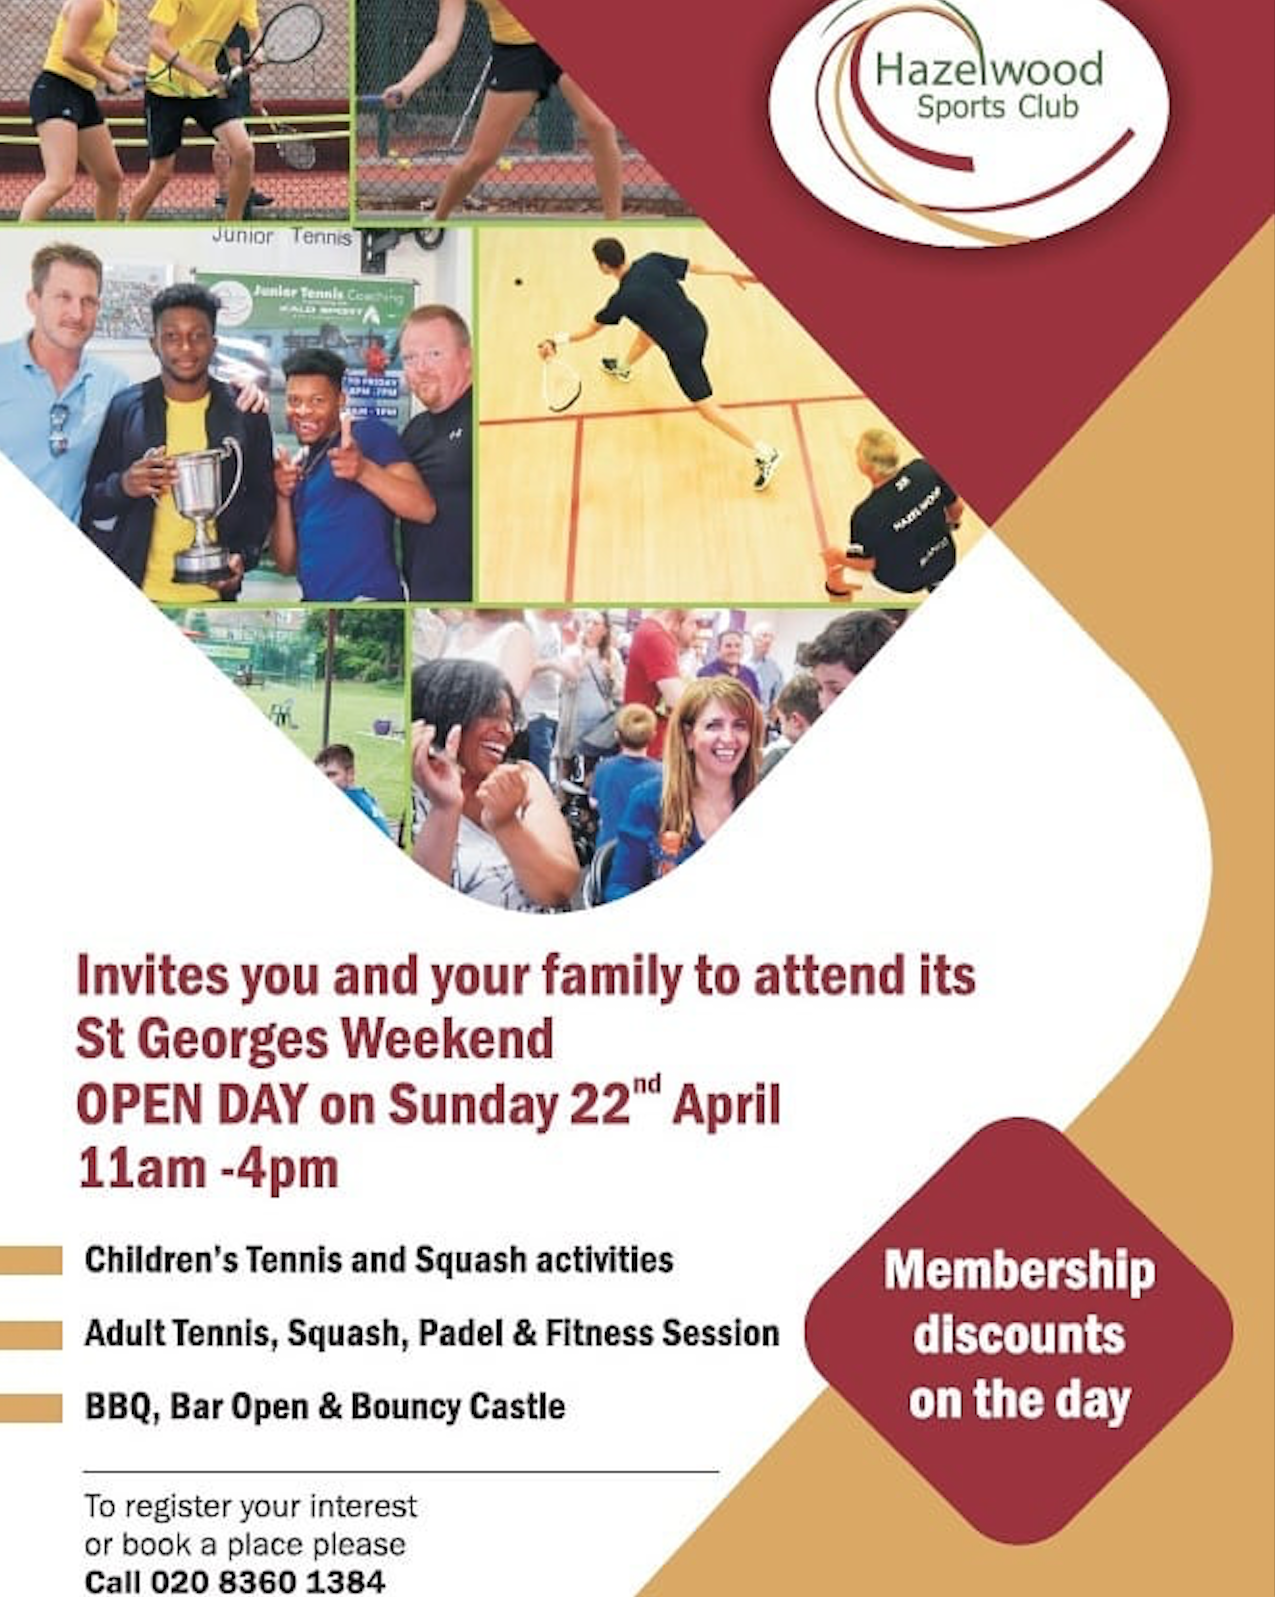 Open Day at Hazelwood Squash Club – 22nd April